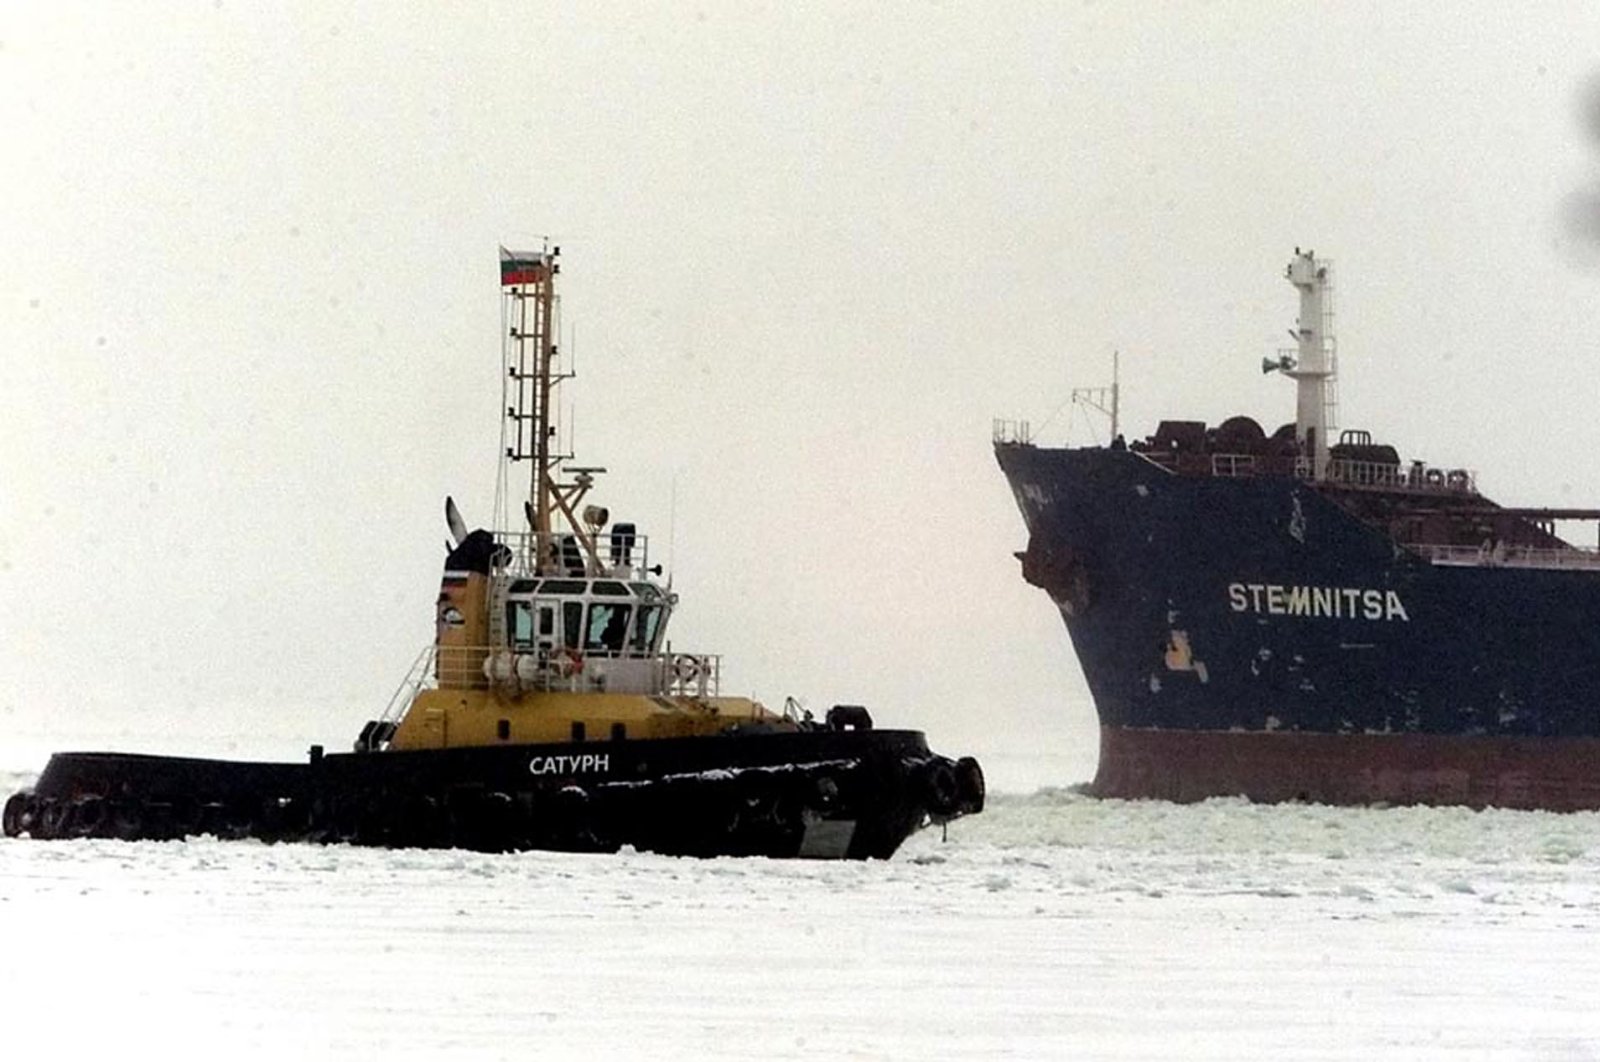 The Greek-registered ship Stemnitsa (R) with 100,000 tons of crude oil on board leaves the Russian port of Primorsk, Feb. 5, 2003. (Reuters File Photo)
